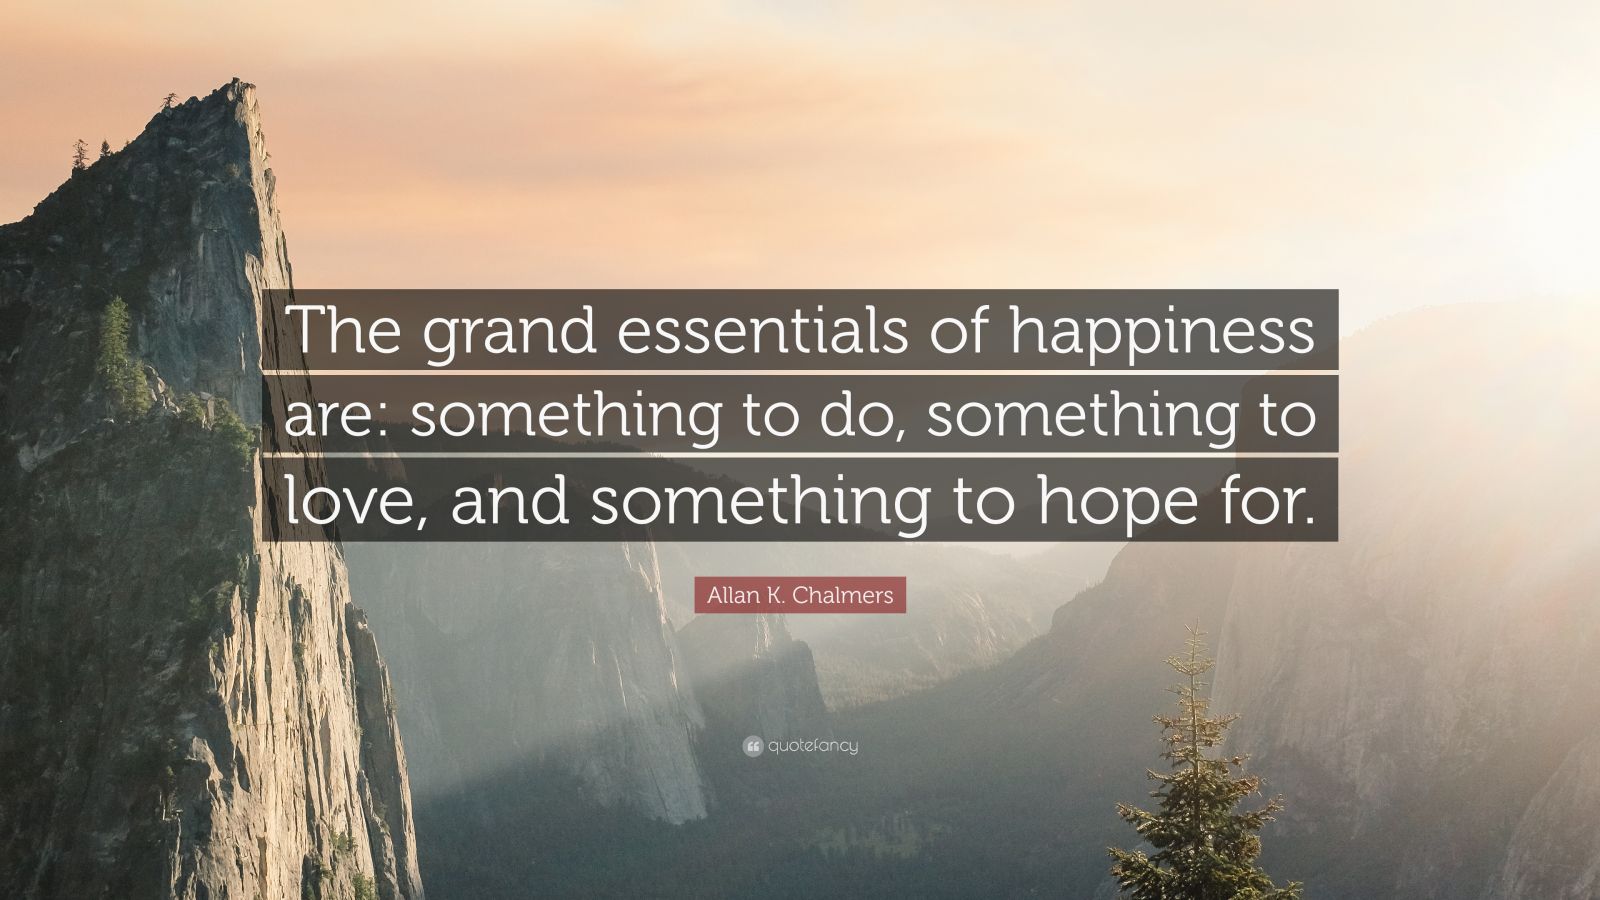 Allan K. Chalmers Quote: “The grand essentials of happiness are ...